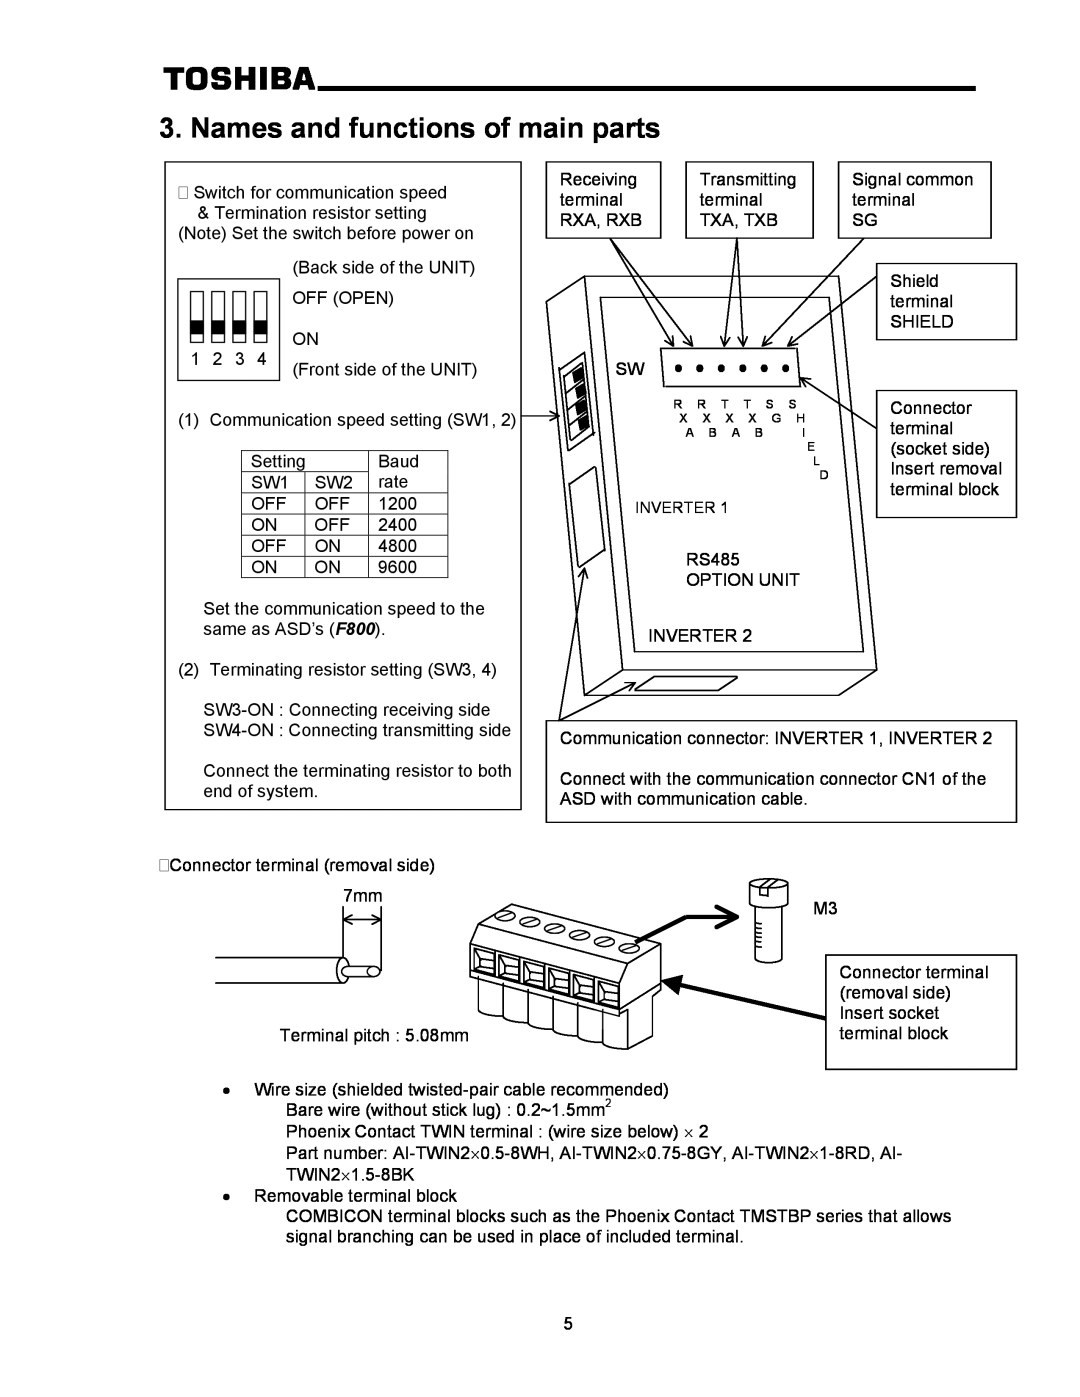 Toshiba RS-485 operation manual Names and functions of main parts, Inverter 